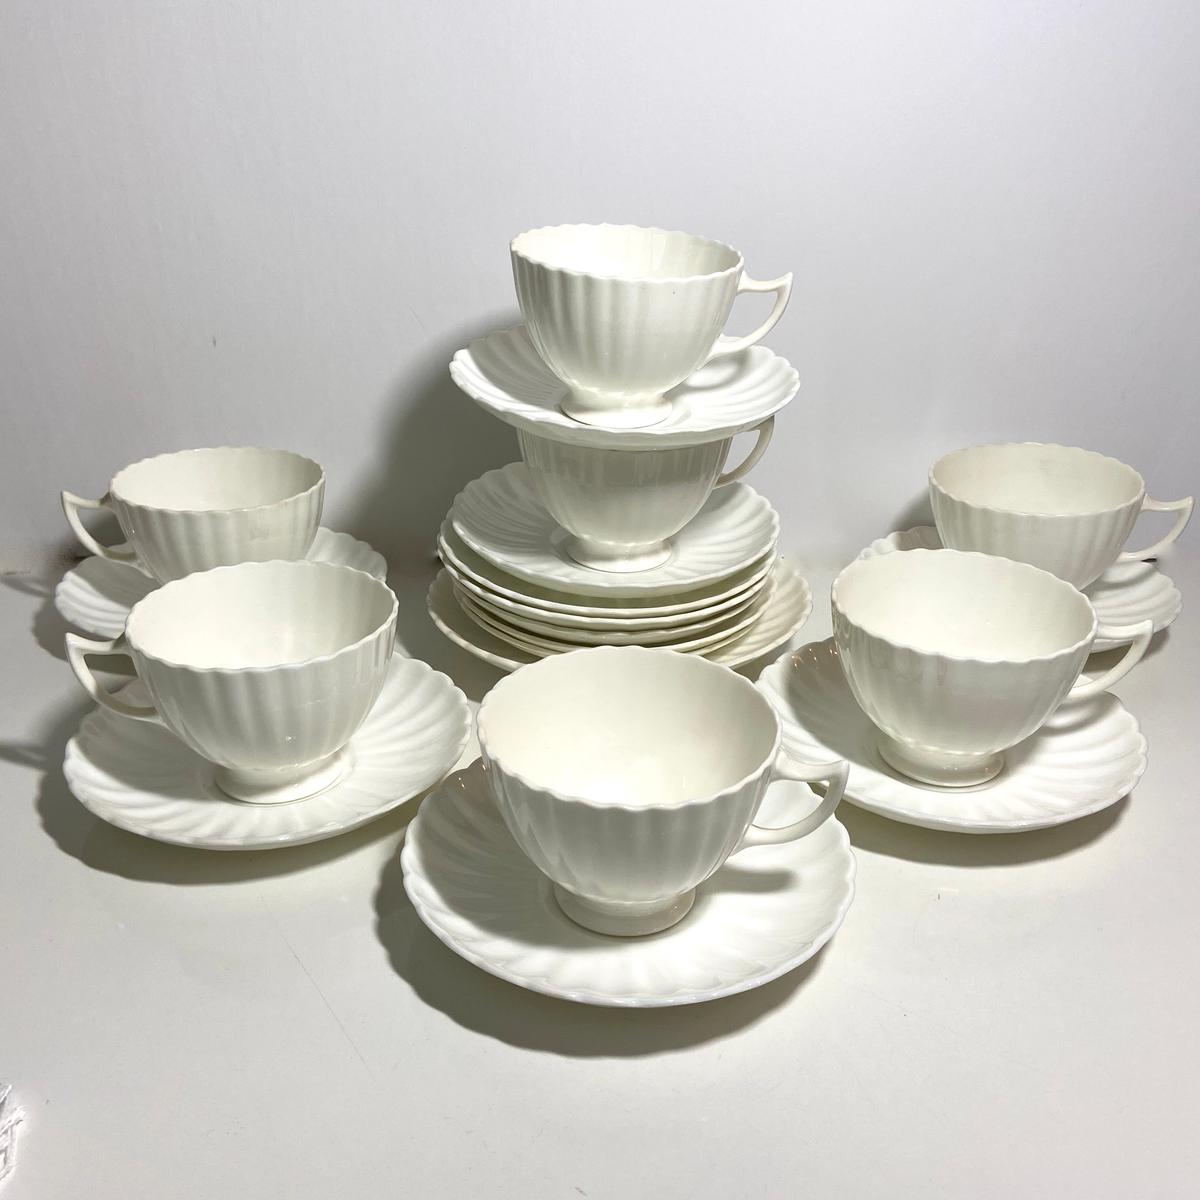 Lot of Radfords Bone China Tea Cups & Saucers Made in England